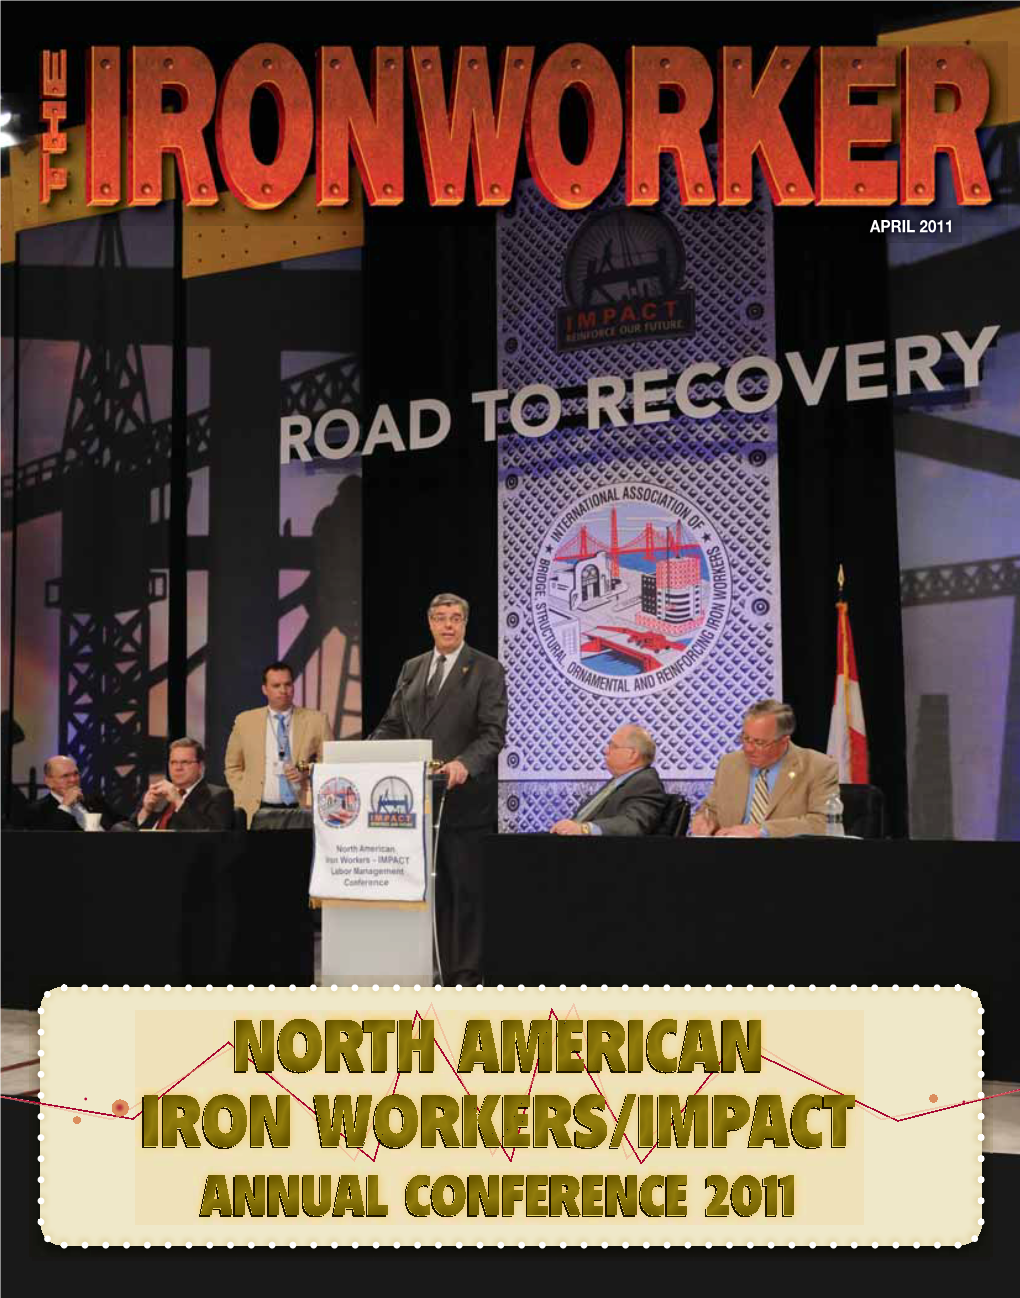 North American Iron Workers/Impact